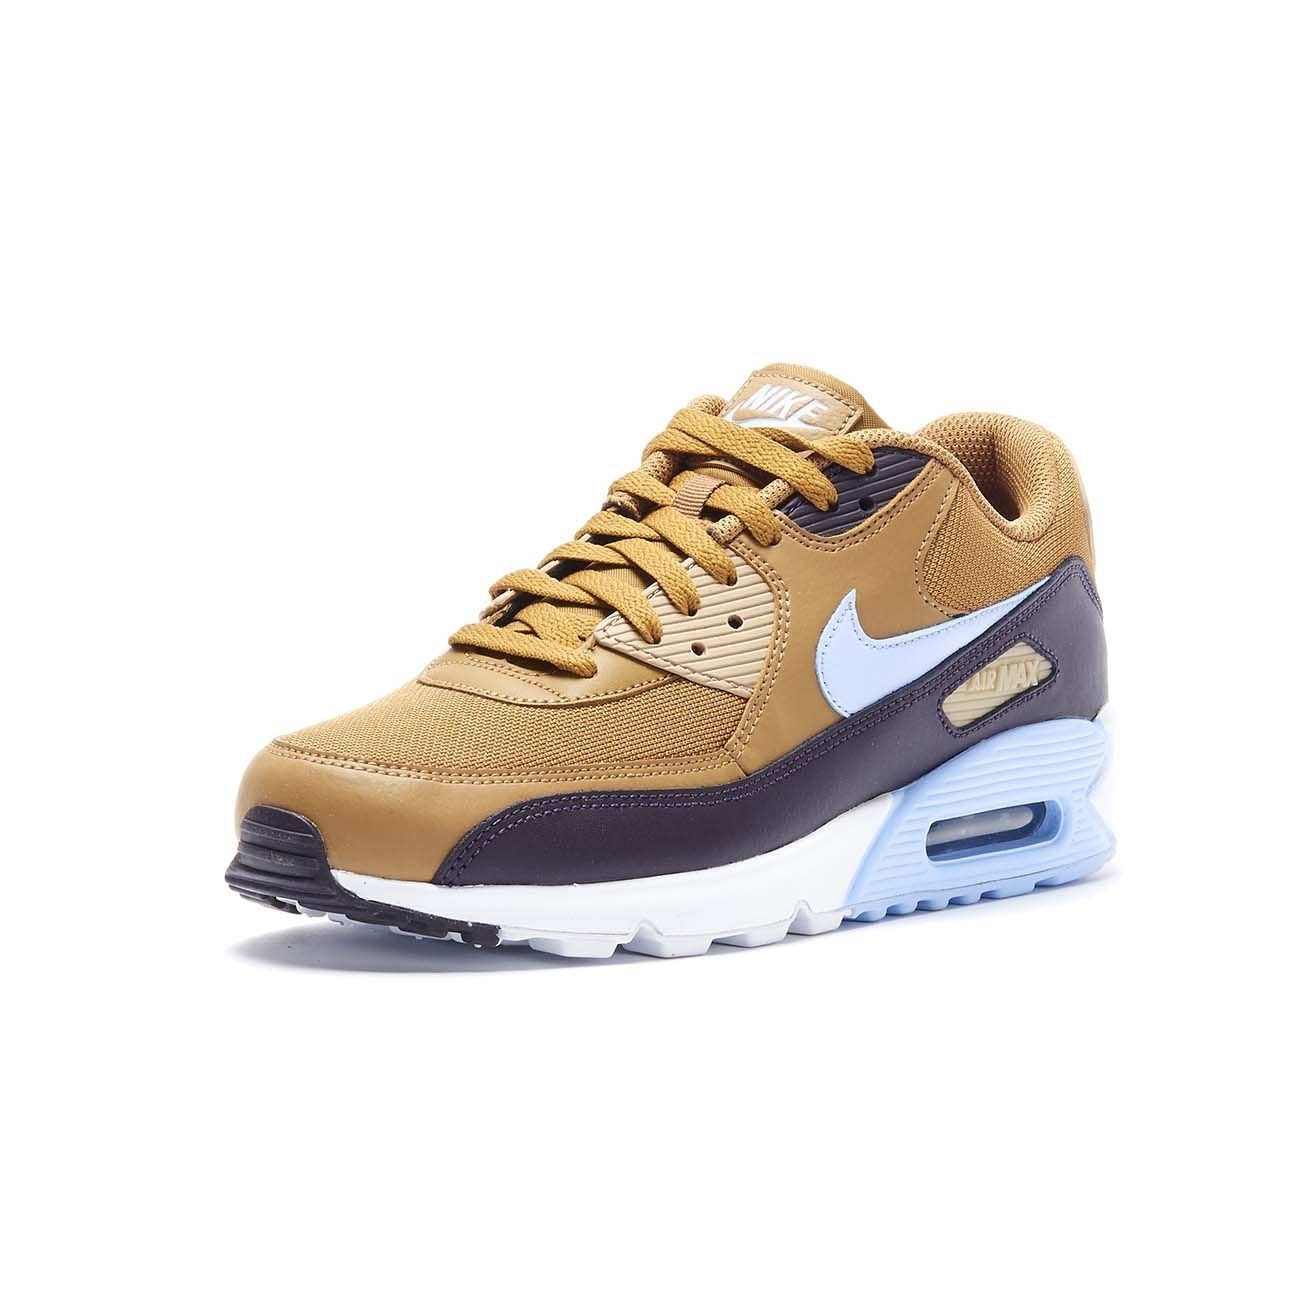 air max 90 muted bronze Promotions